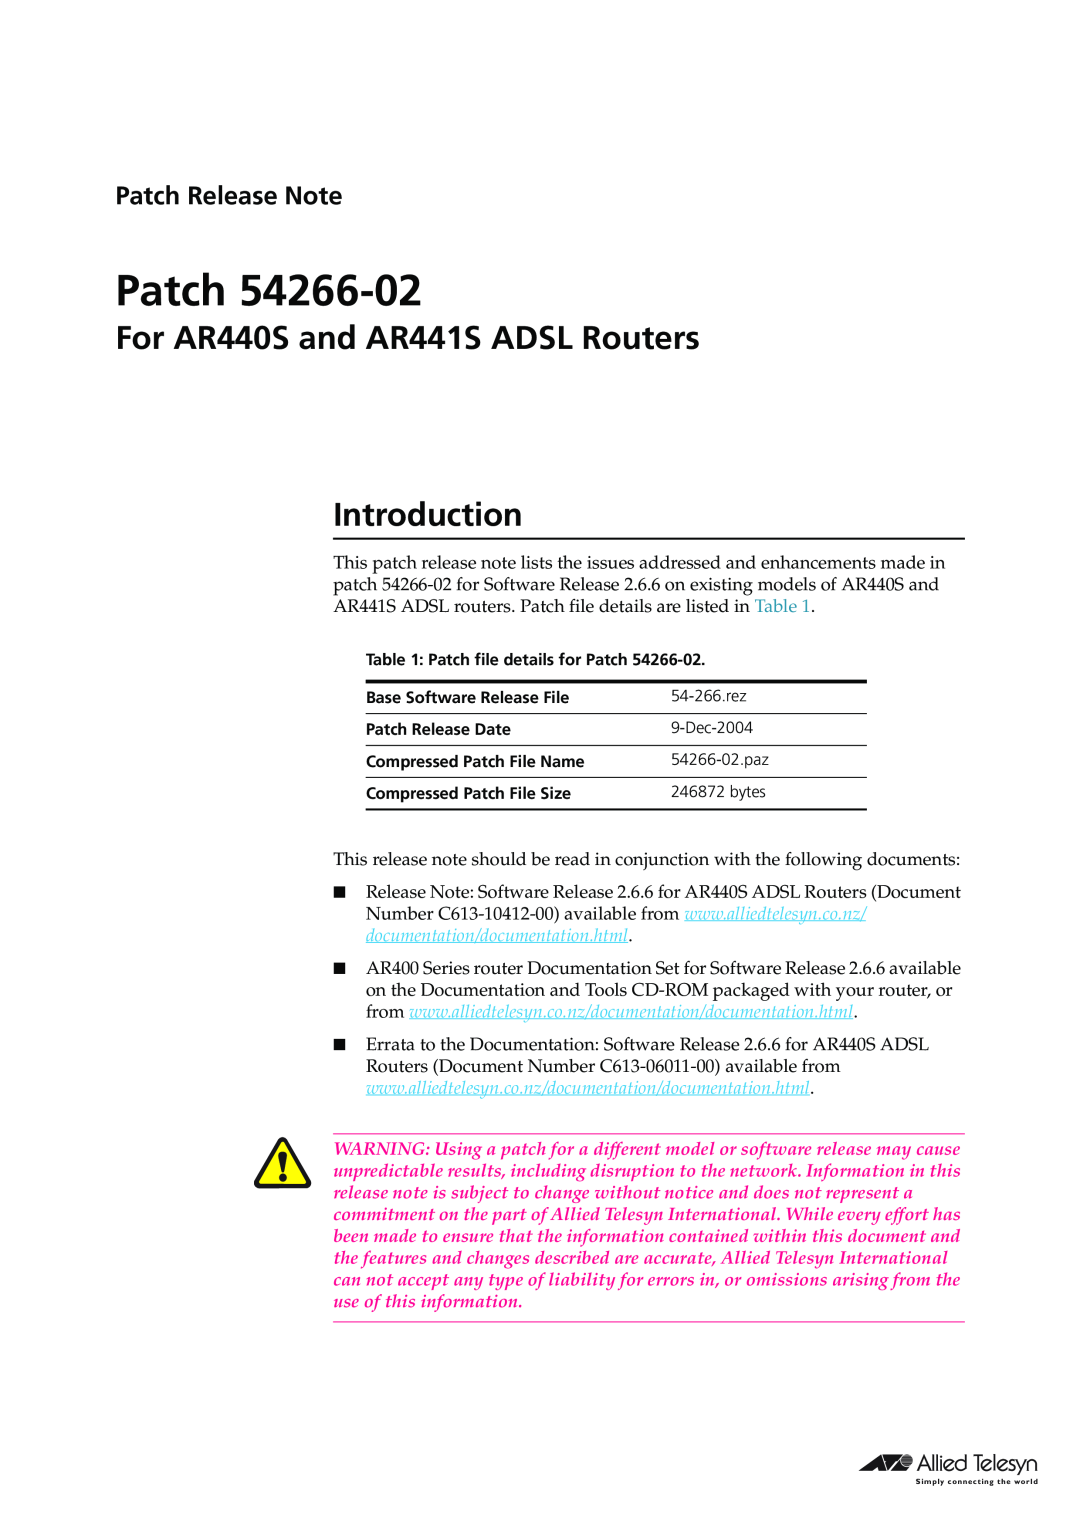 Allied Telesis 54266-02 manual For AR440S and AR441S ADSL Routers Introduction, Patch Release Note 